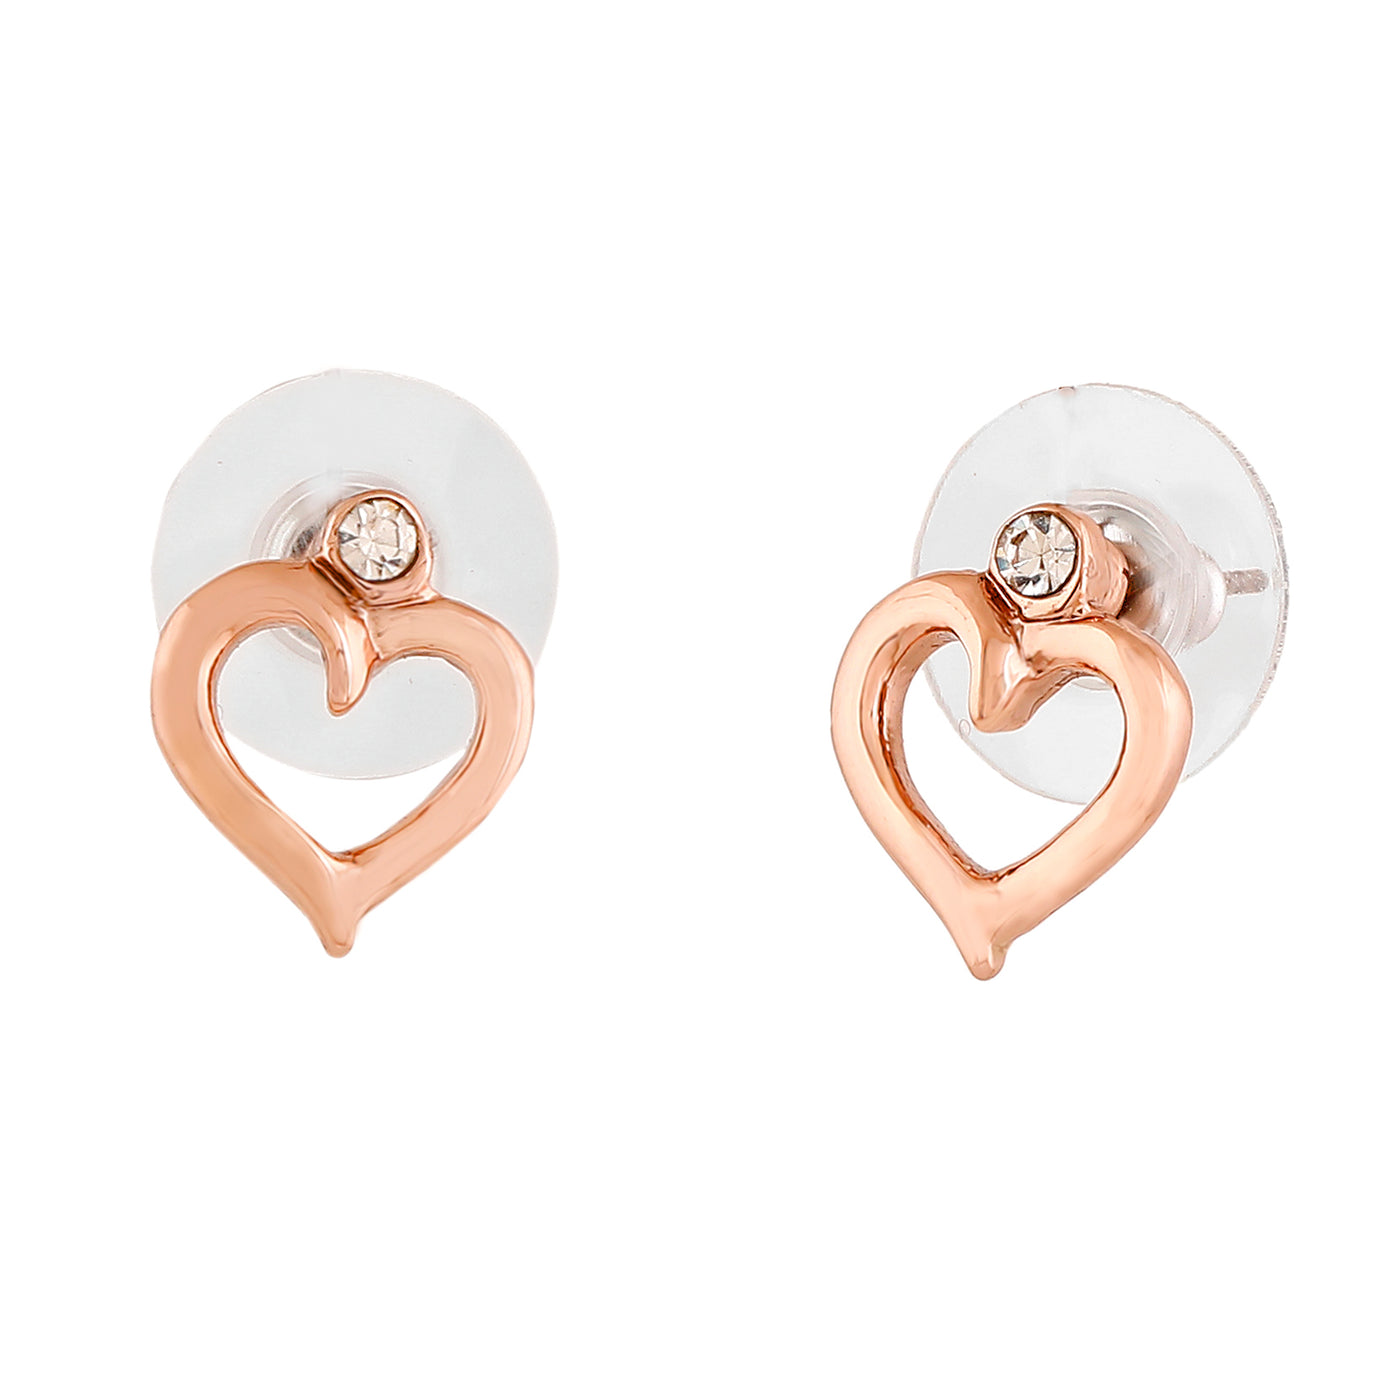 Estele Rose Gold Plated Heart Shaped Stud Earrings with Austrian Crystals for Women